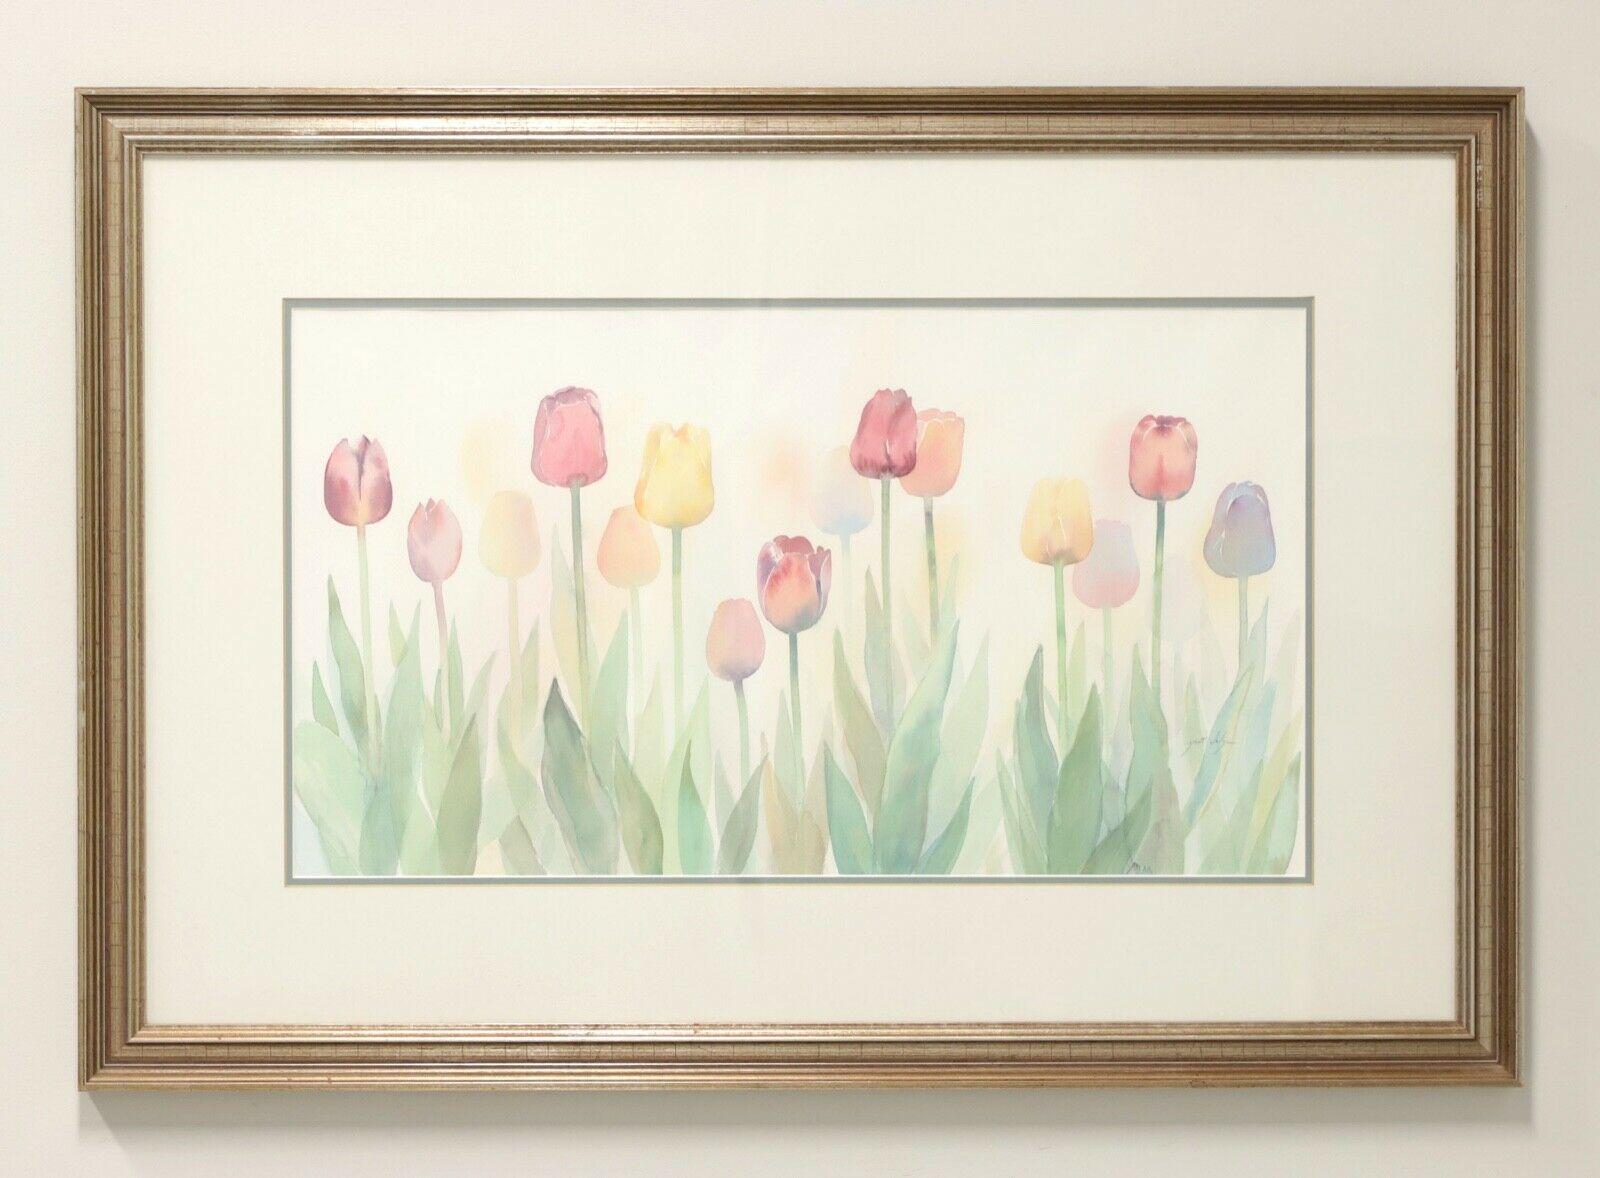 20th Century Original Watercolor Painting - Spring Tulips - Signed Grant Dolge For Sale 2